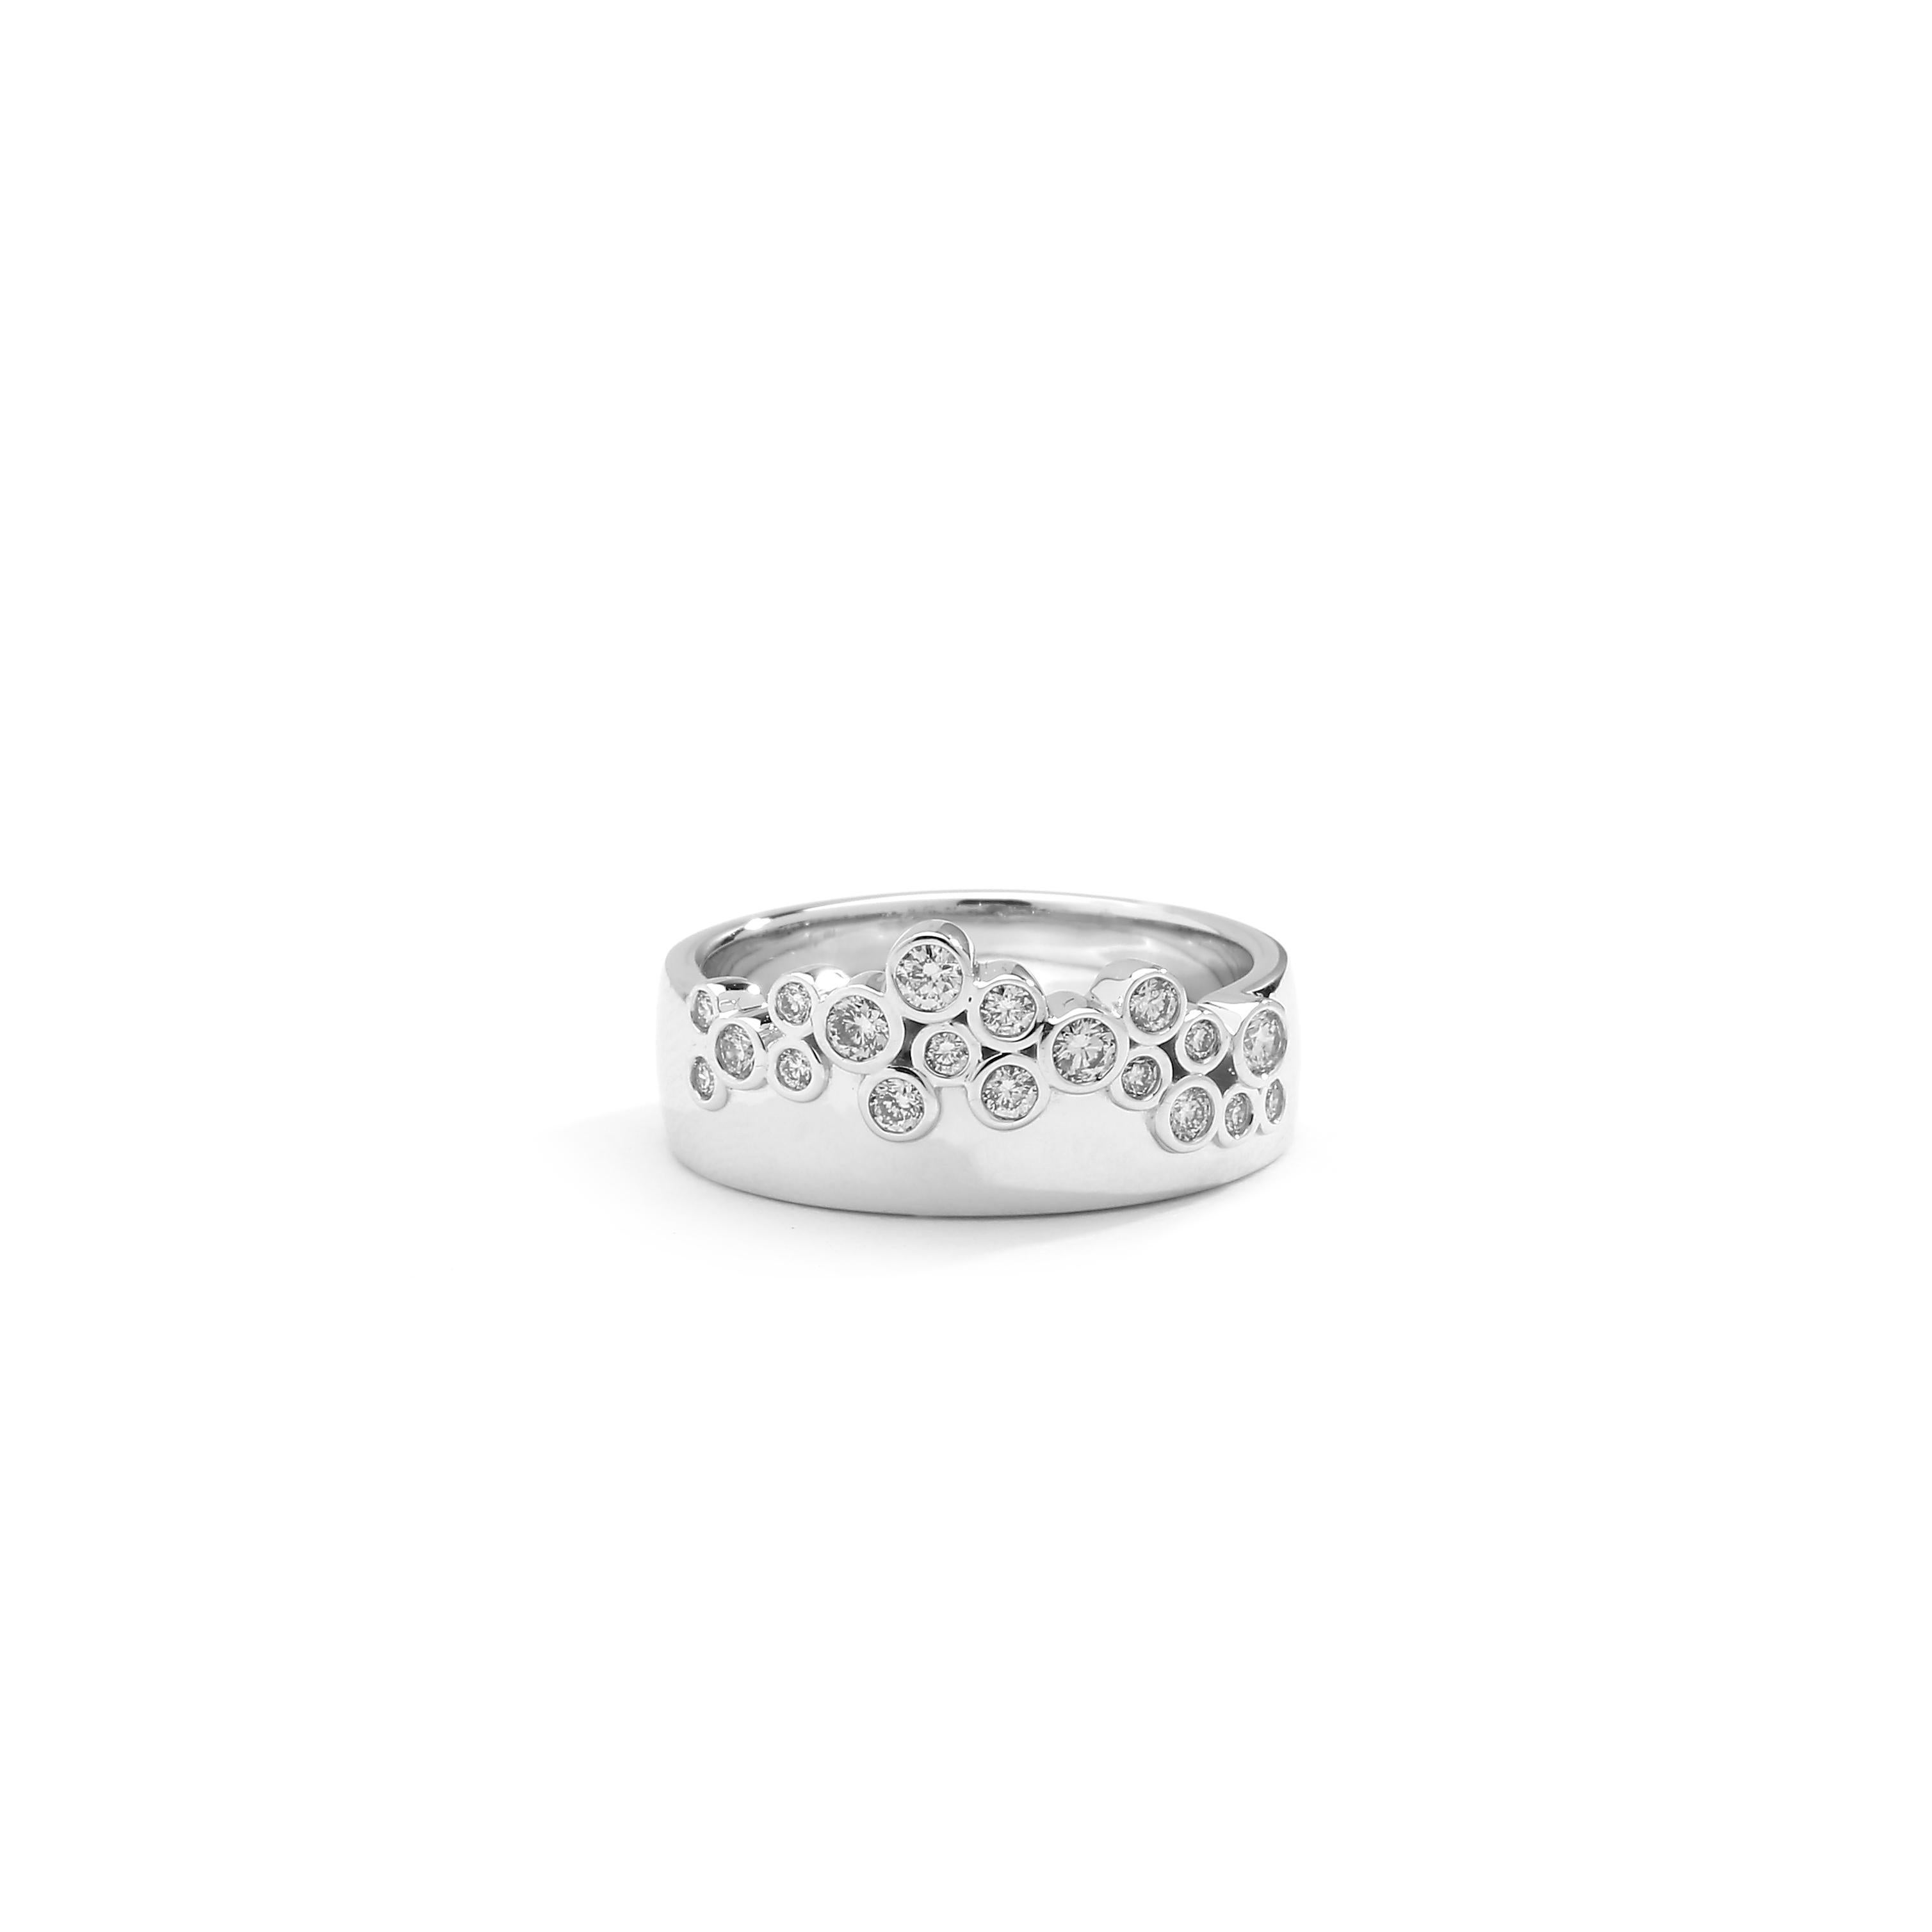 Created in 18 karat white gold
Diamonds 0.35 ct approx
Band size US 6.5 
Limited edition

This exquisite piece is crafted with 18 karat white gold and embodies 0.35 carats of luminous diamonds, providing a timeless elegance. With a captivating band